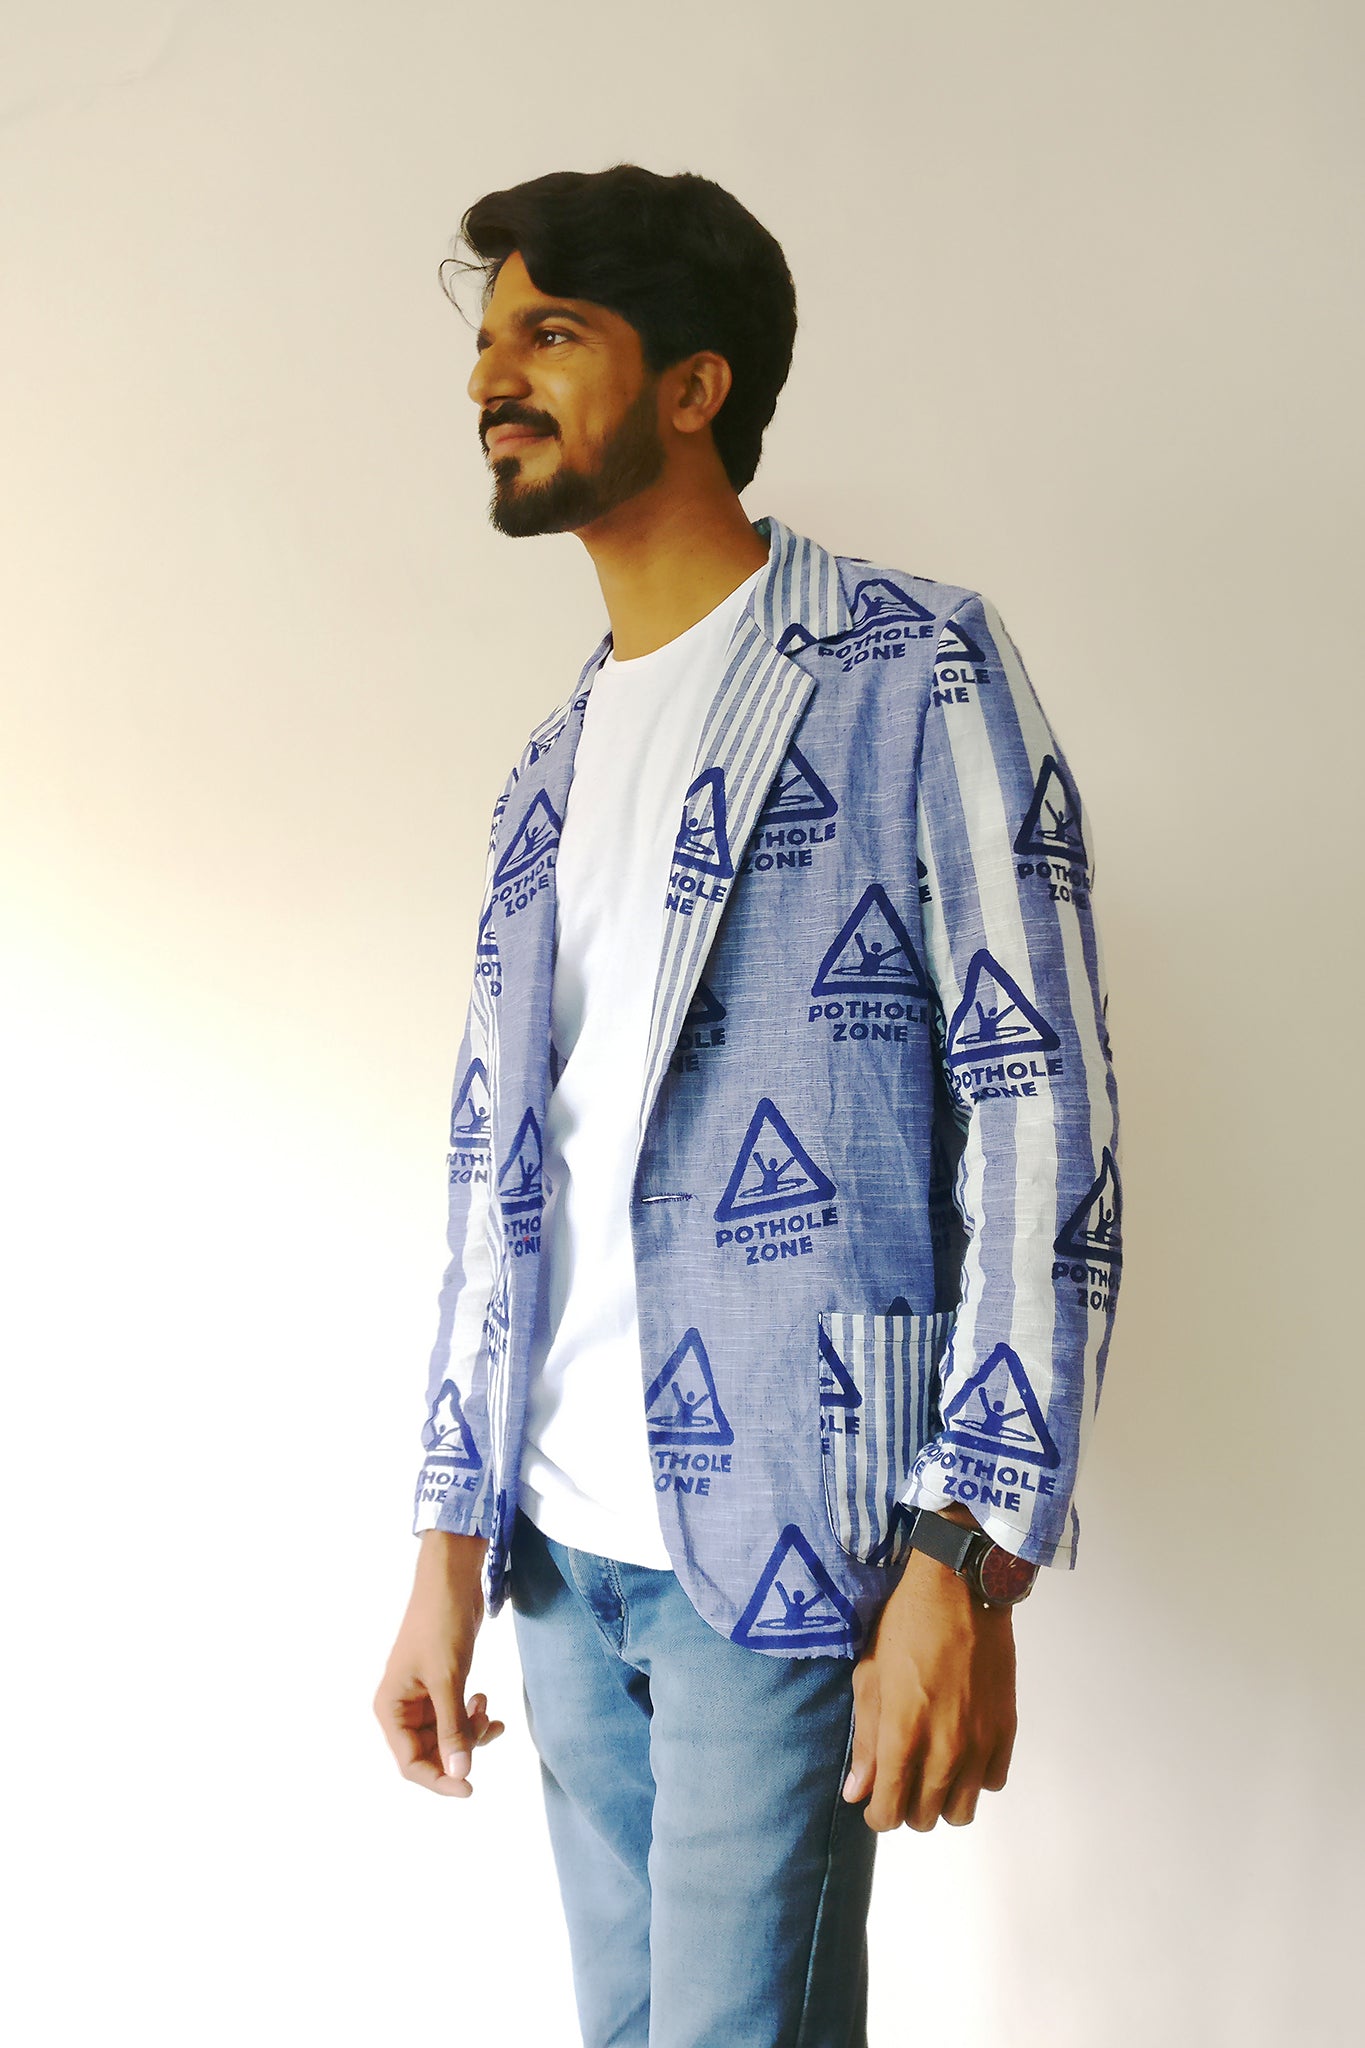 Wear your love for Bombay Meri Jaan. This time we talked about potholes. Men's Blazer Jacket with our original print on very cool handloom stripe cotton fabric. Shop online and survive the crazy Mumbai monsoon!